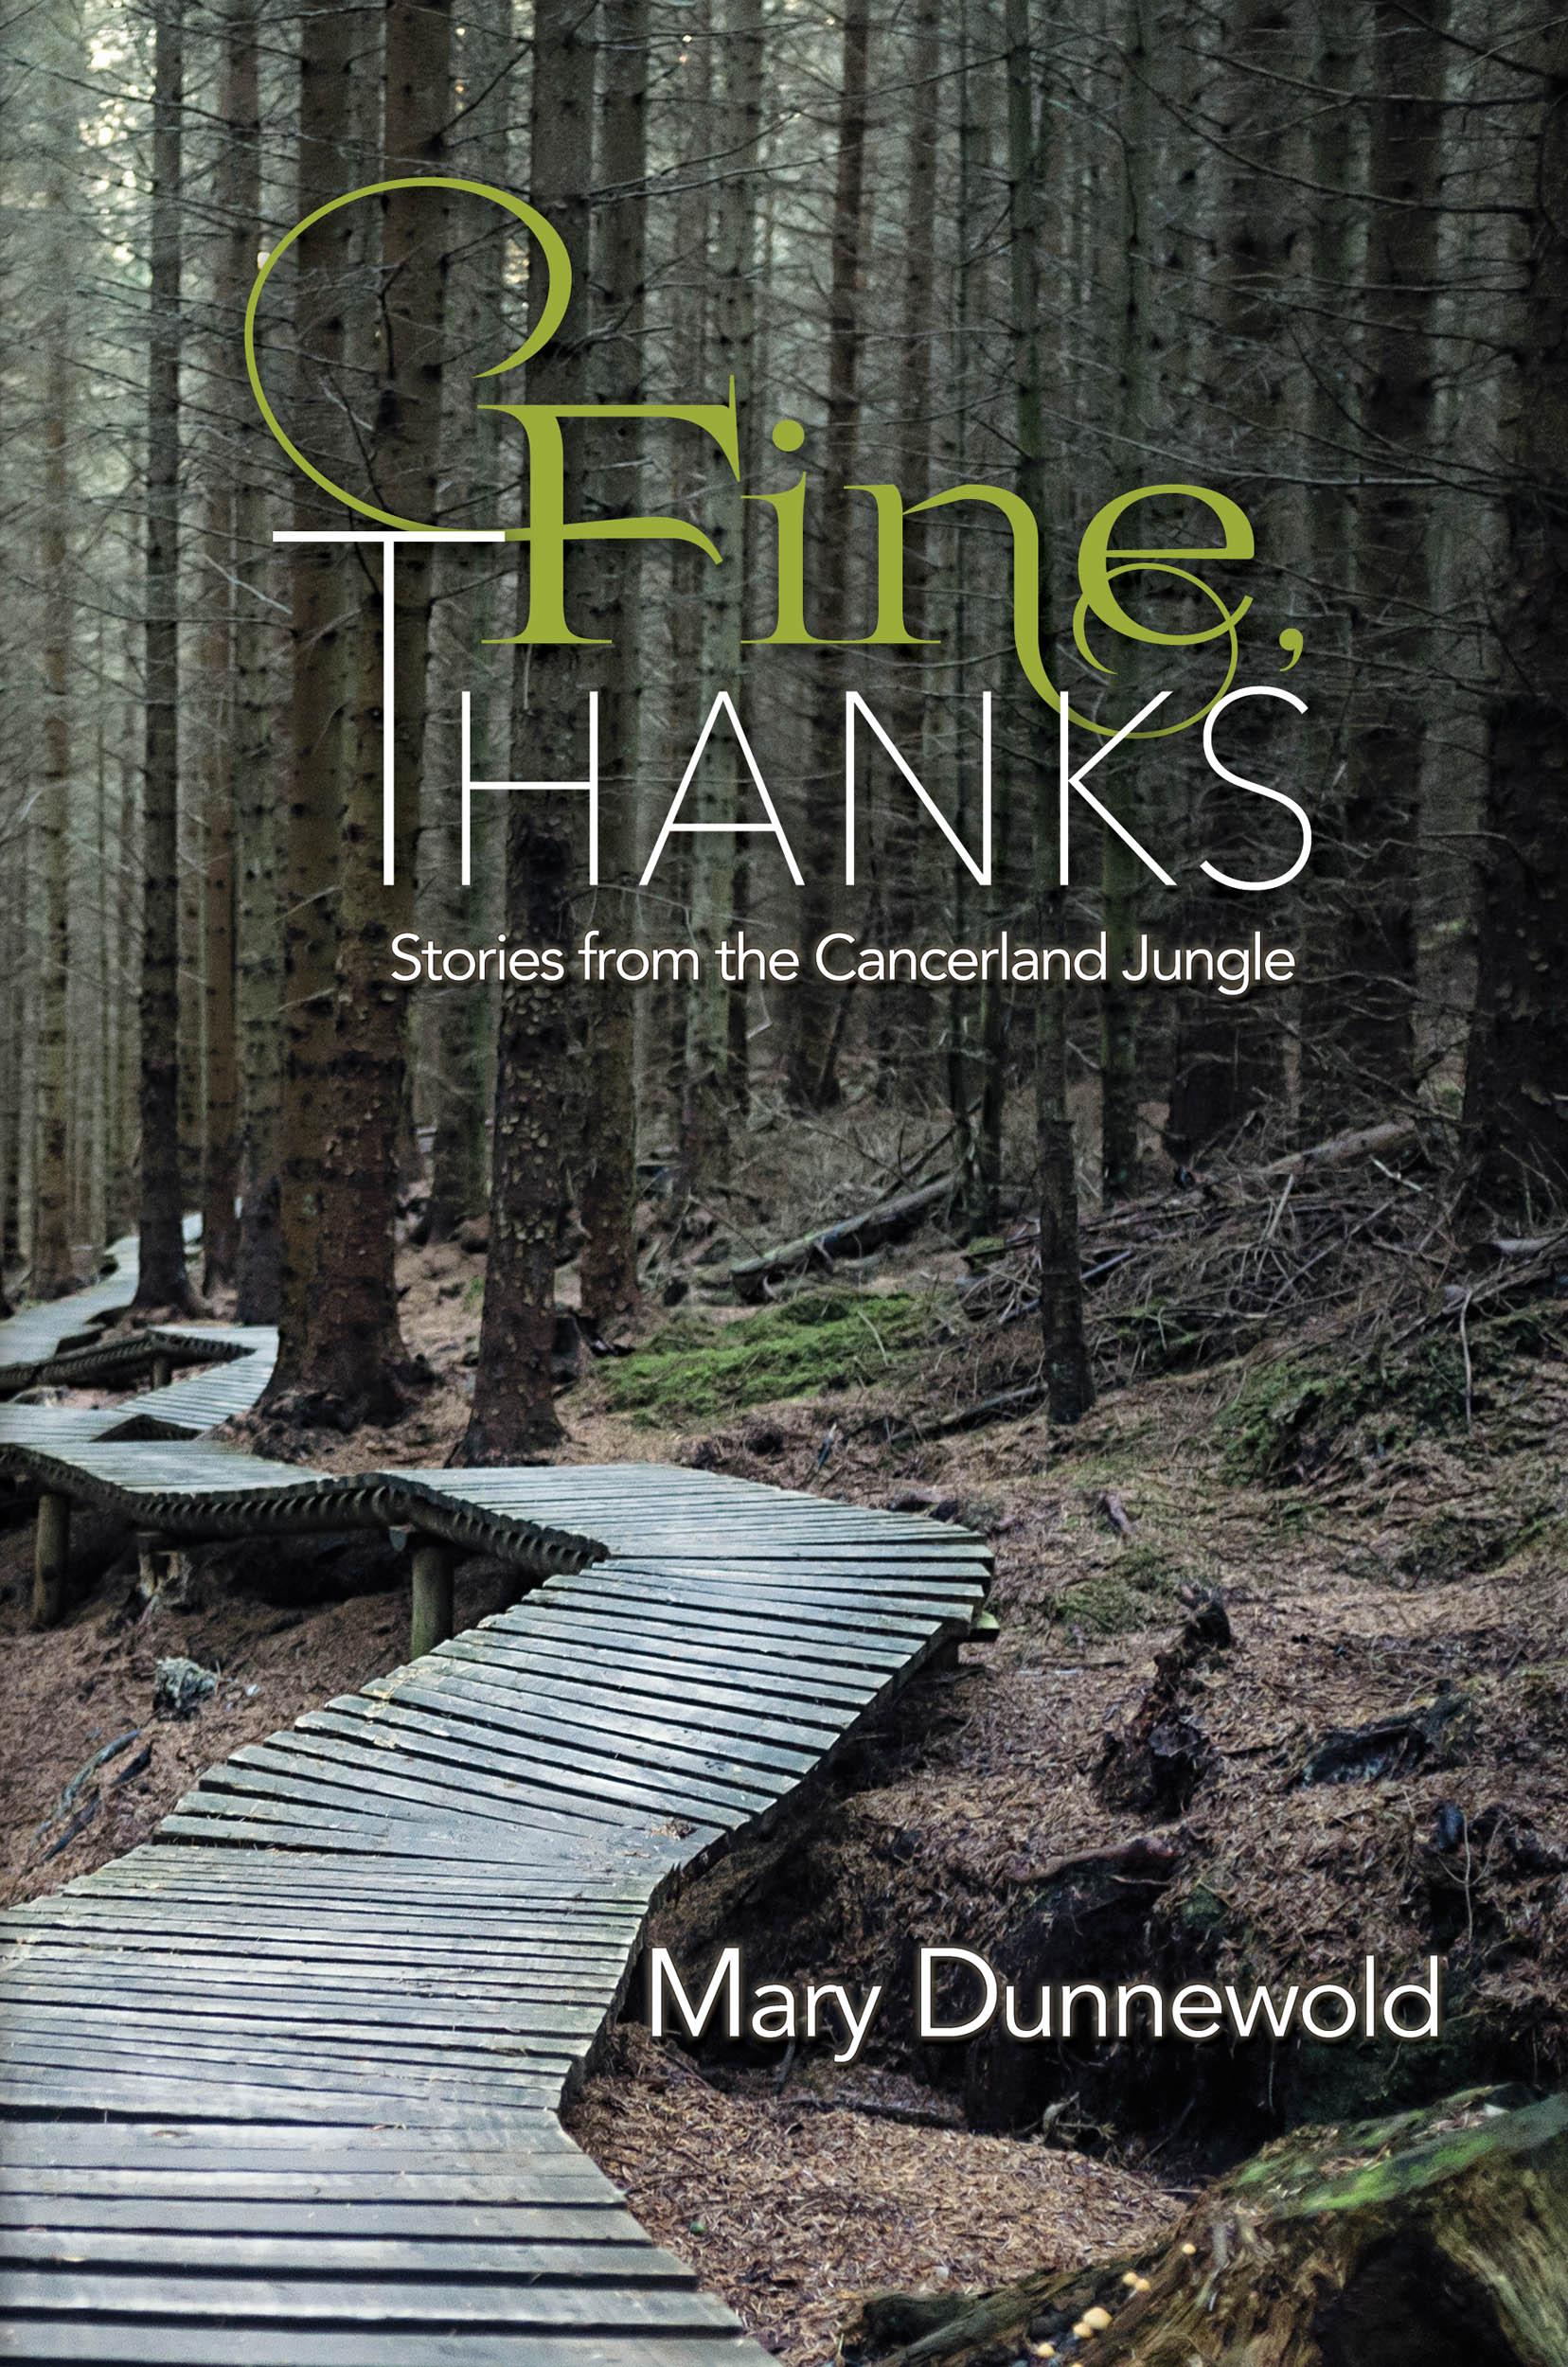 FREE: Fine, Thanks by Mary Dunnewold